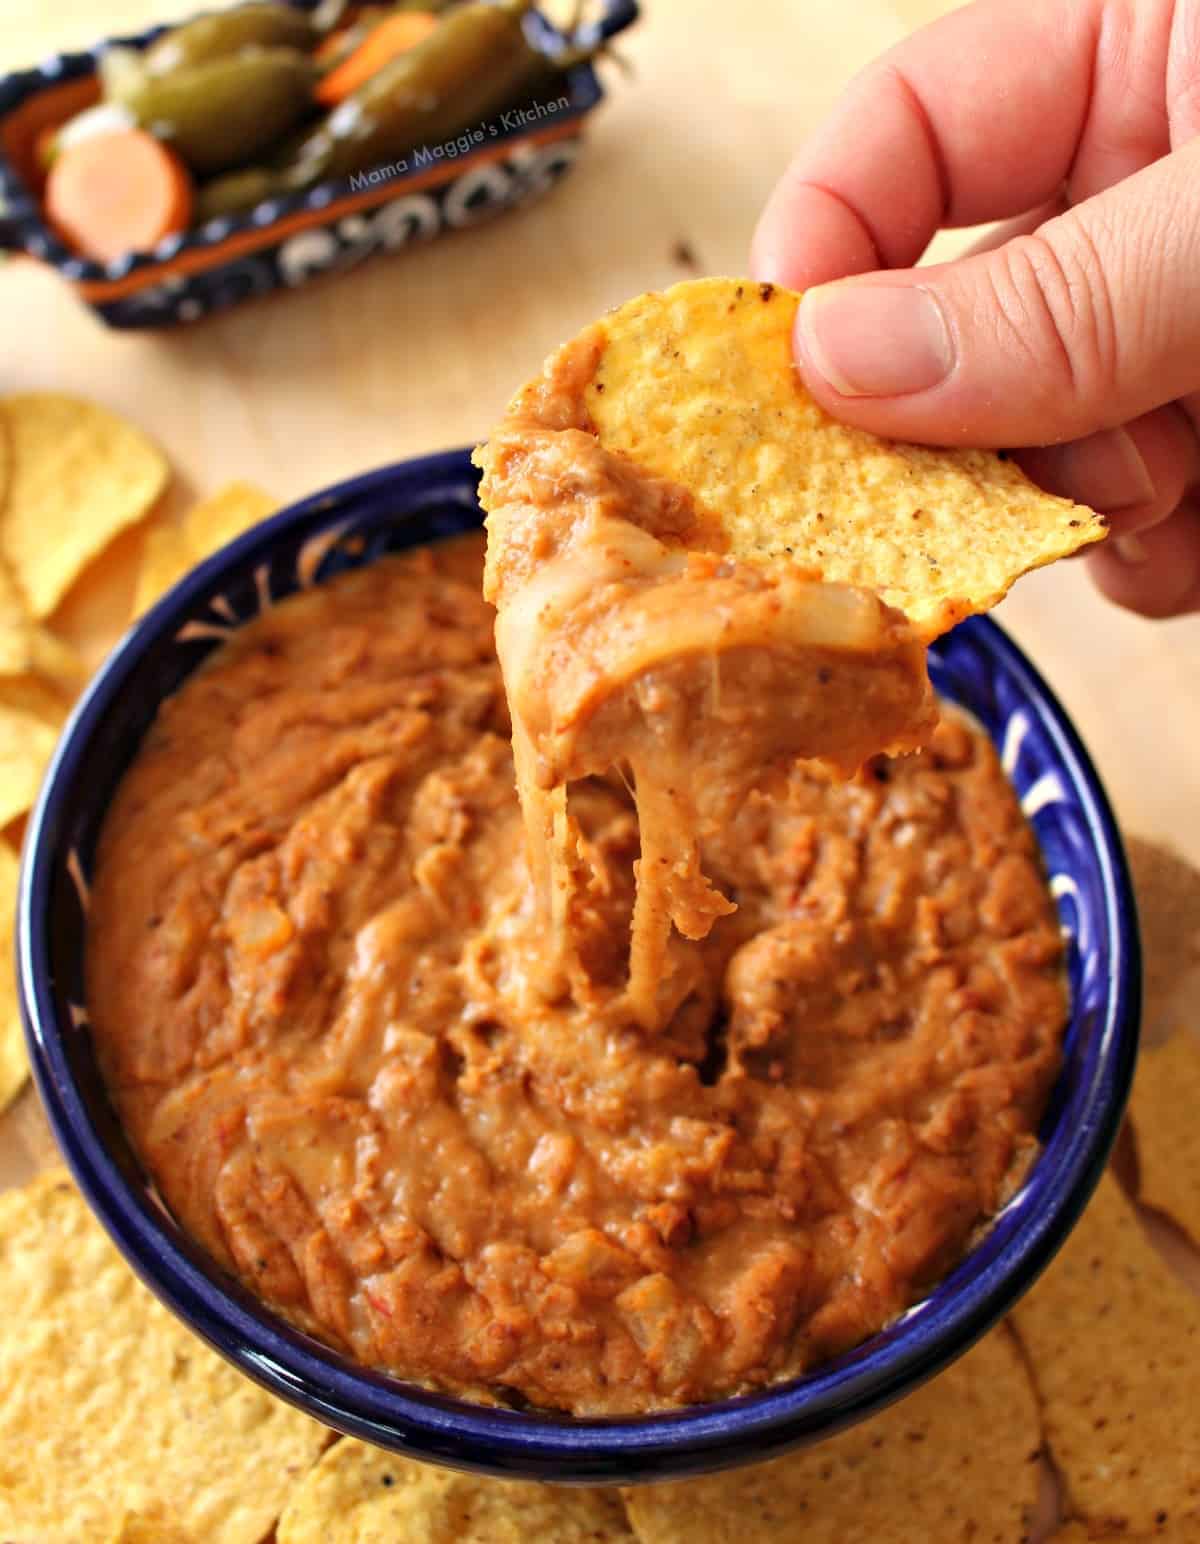 A hand holding a chip with frijoles puercos over a blue bowl.